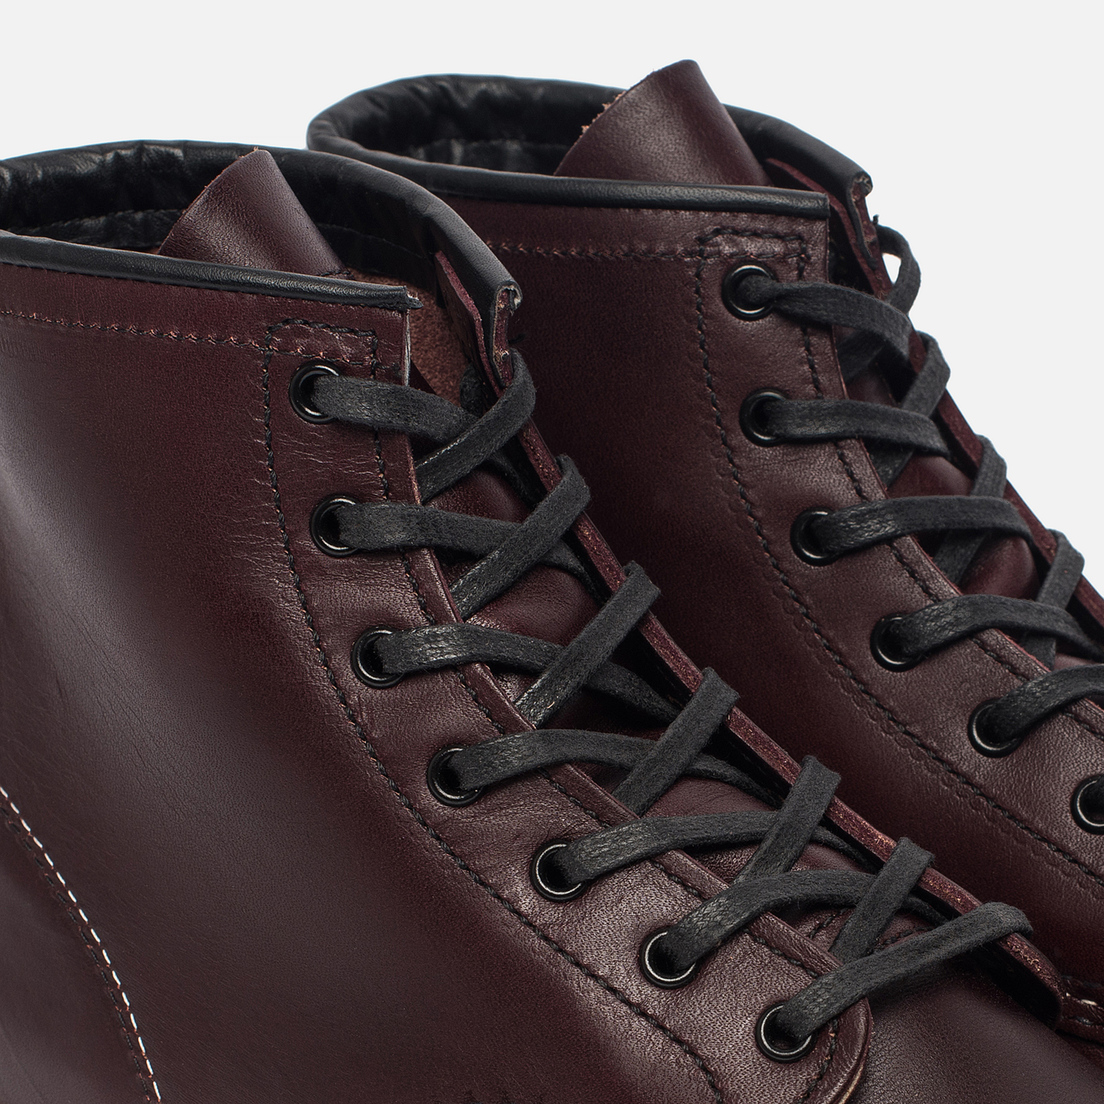 Red Wing Shoes Мужские ботинки 9011 Beckman Round Leather